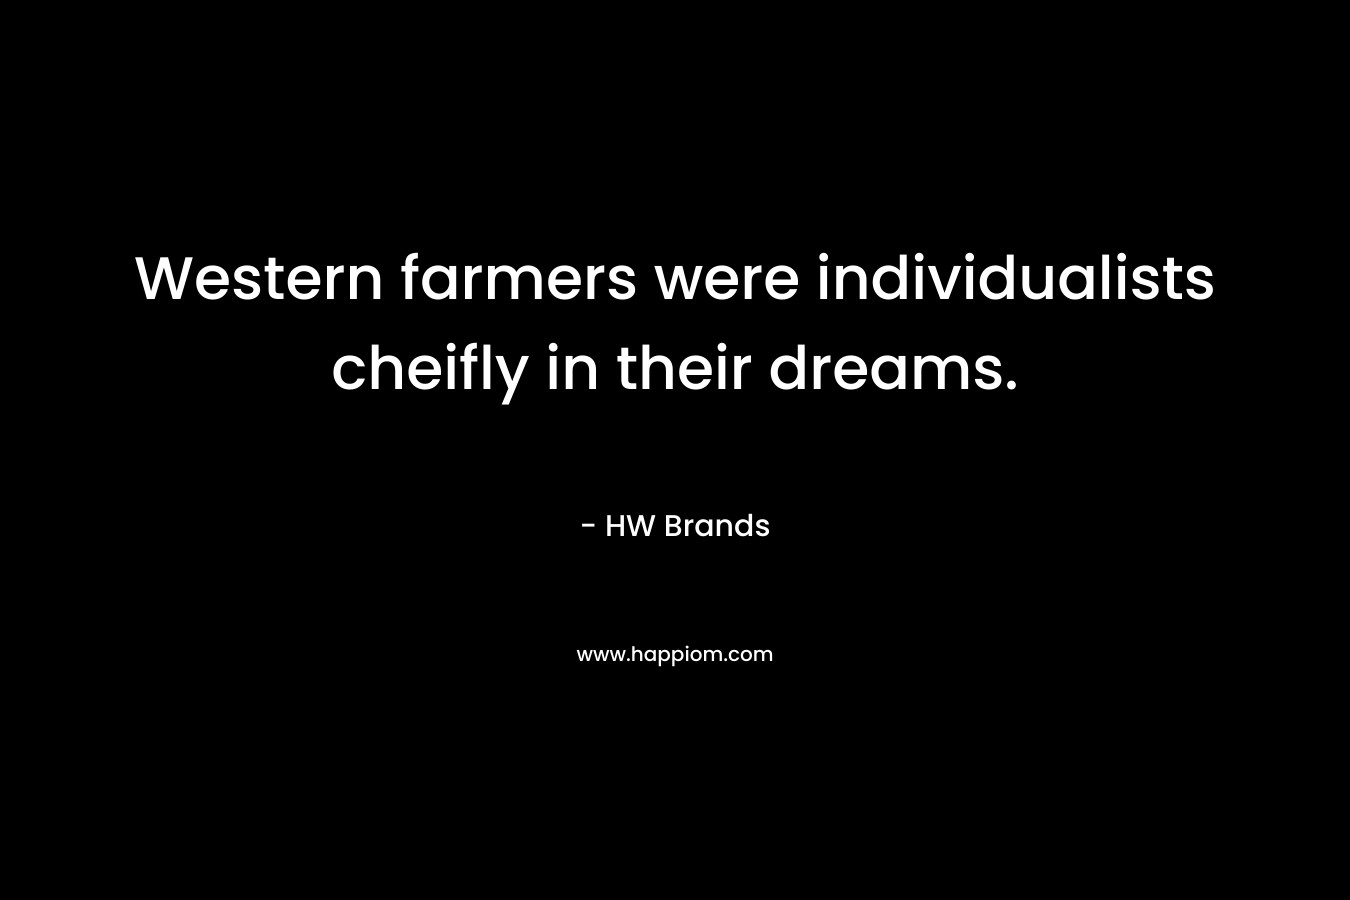 Western farmers were individualists cheifly in their dreams. – HW Brands